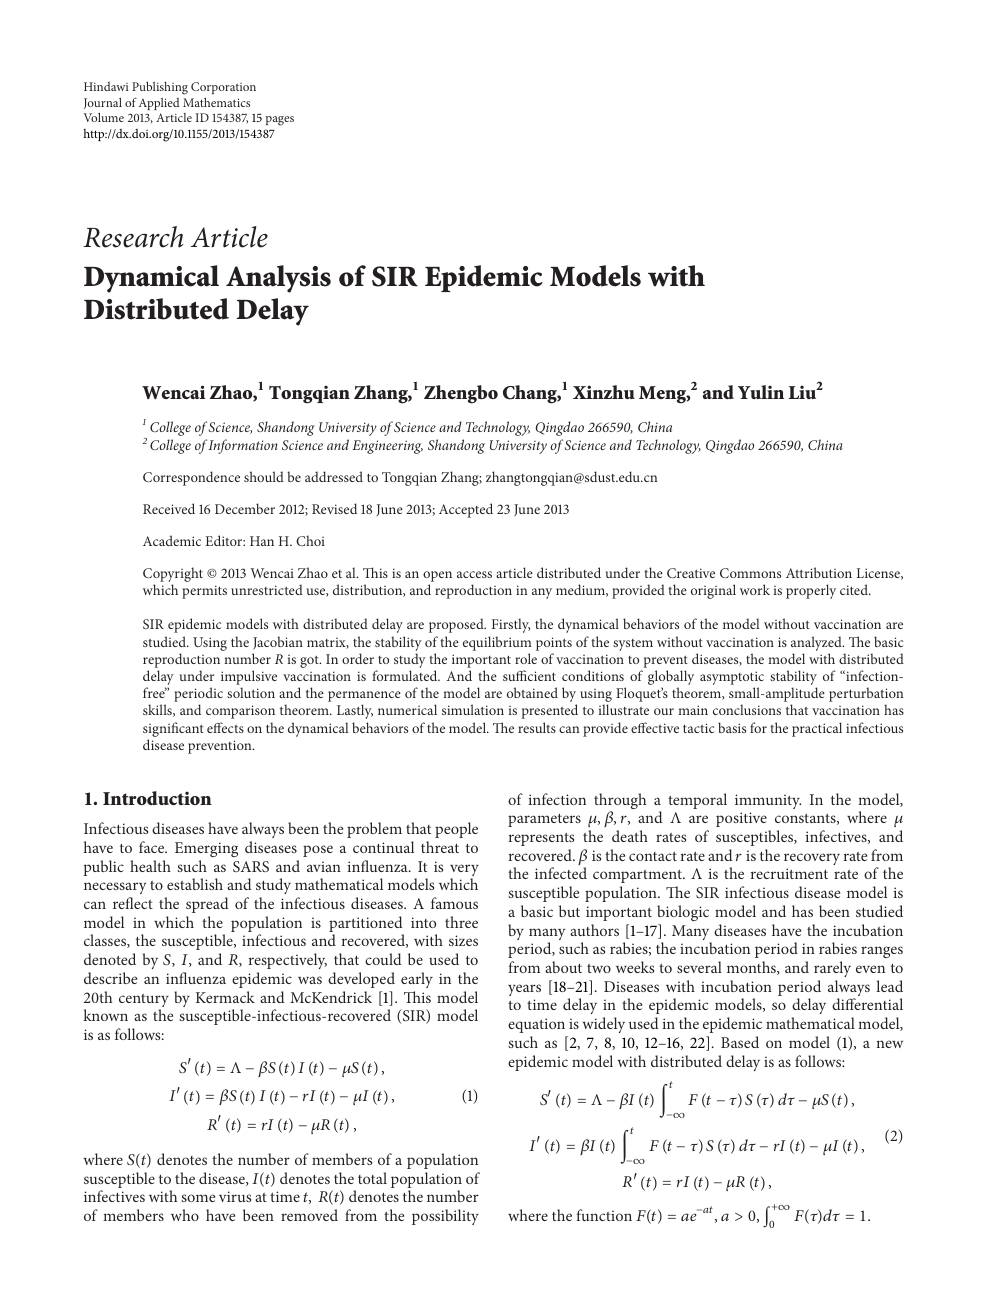 Dynamical Analysis Of Sir Epidemic Models With Distributed Delay Topic Of Research Paper In Mathematics Download Scholarly Article Pdf And Read For Free On Cyberleninka Open Science Hub